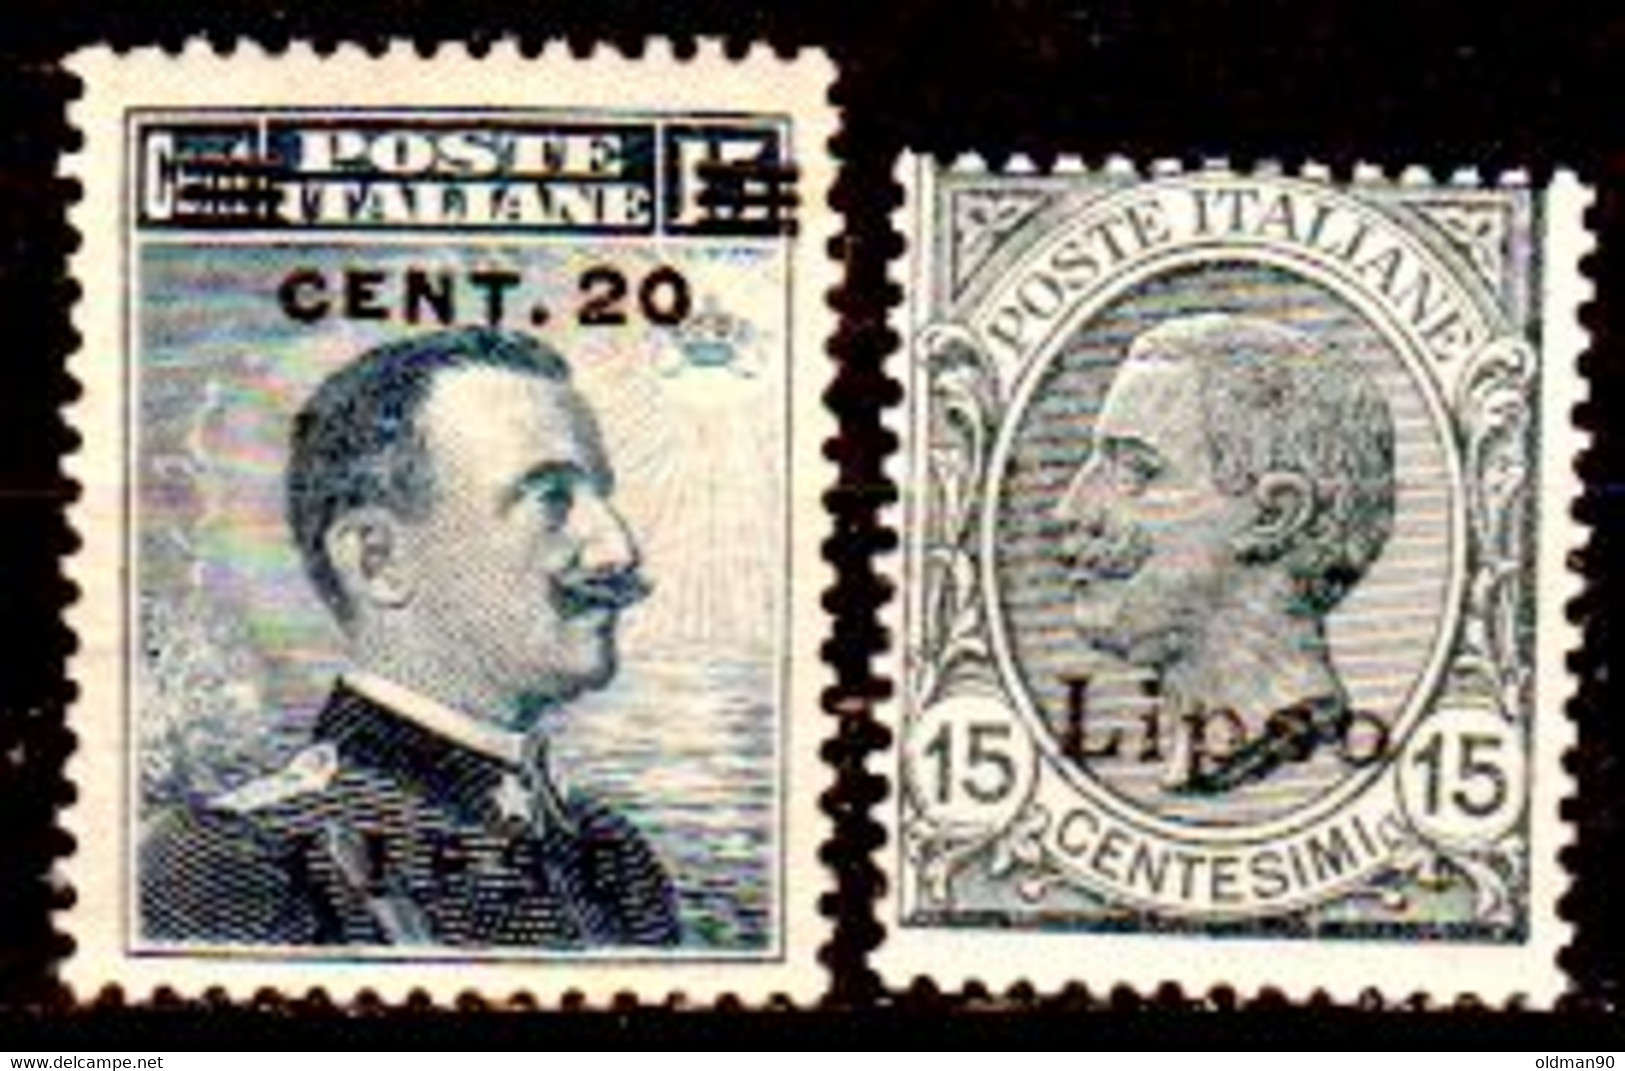 Egeo-OS-299- Lipso: Original Stamps And Overprint 1916-21 (++) MNH - Quality In Your Opinion. - Ägäis (Lipso)